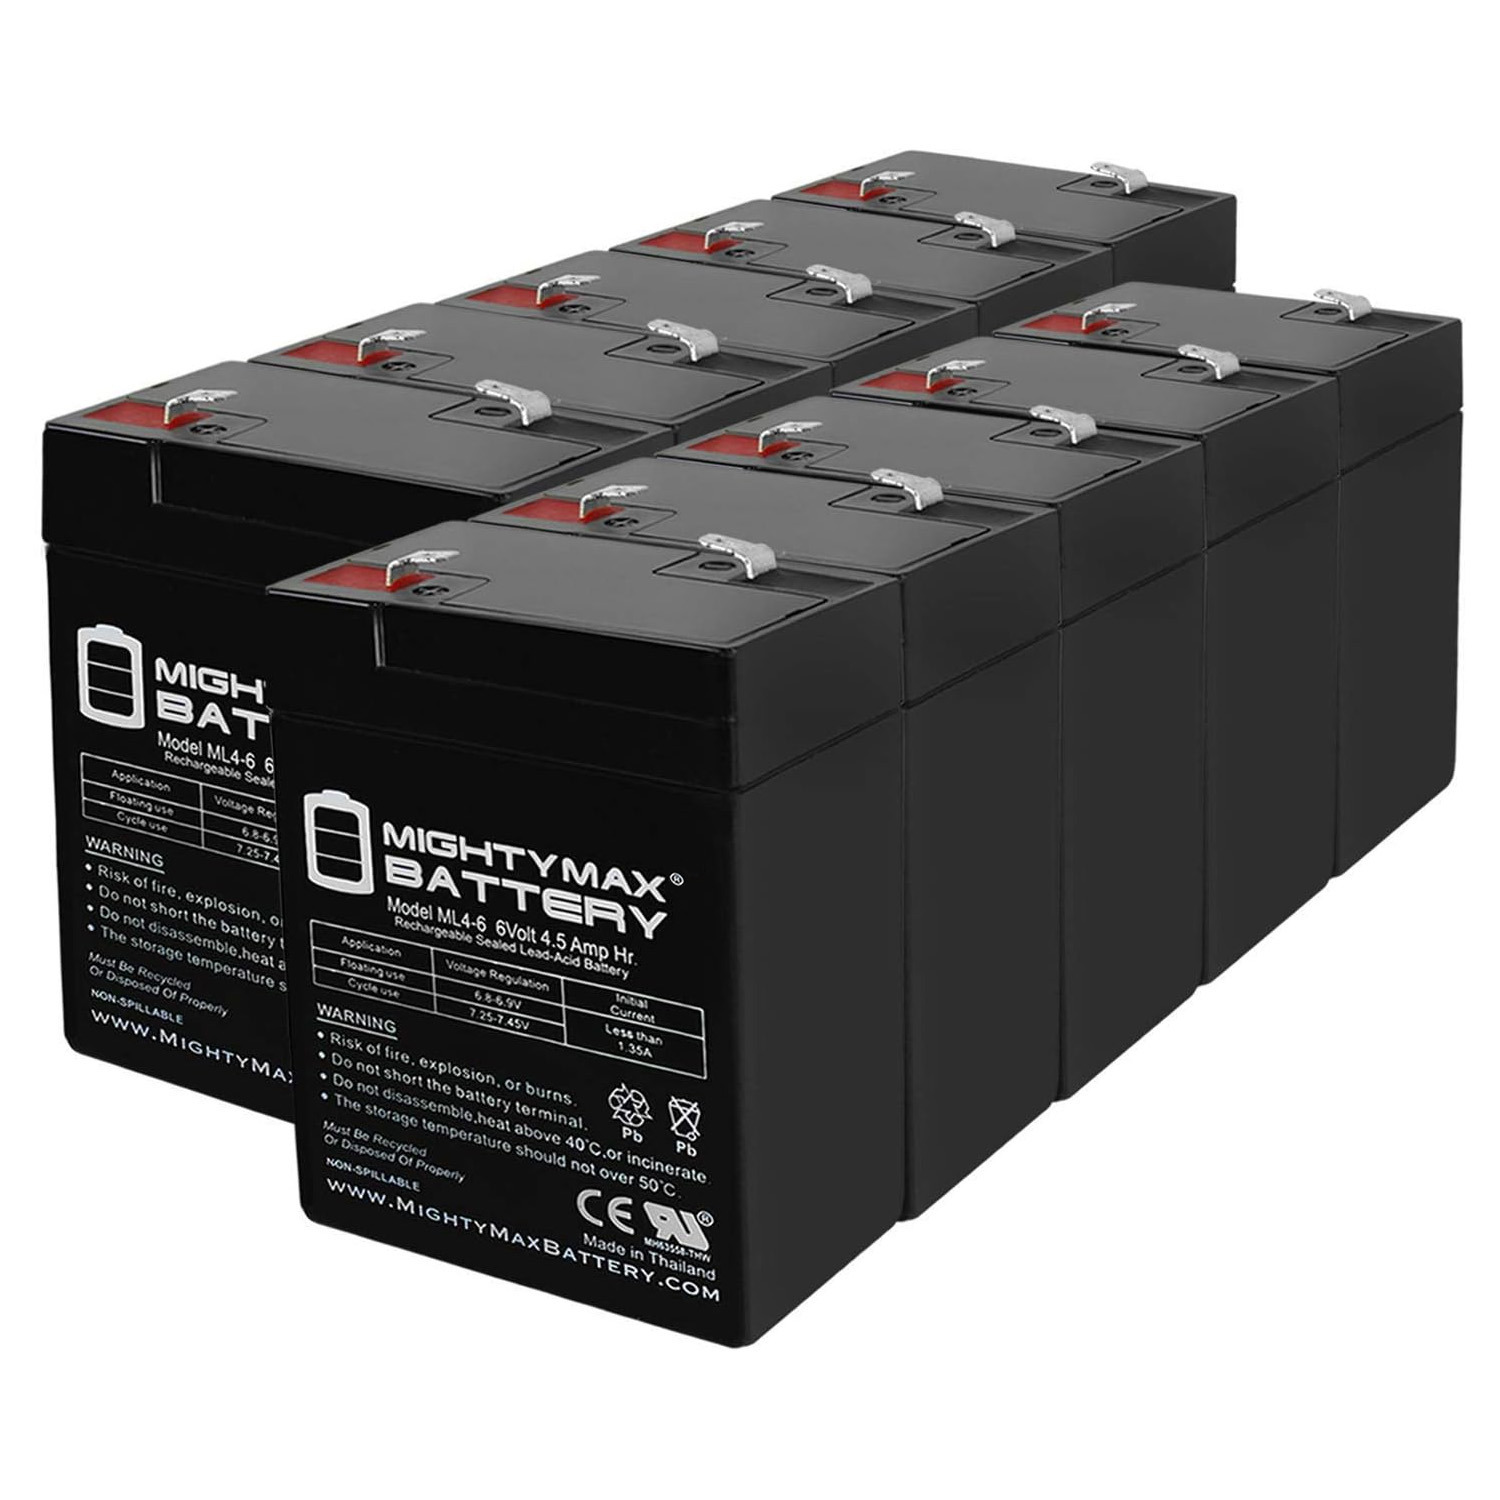 ML4-6 - 6V 4.5AH Replacement Battery for Diamex DM64 - 10 Pack